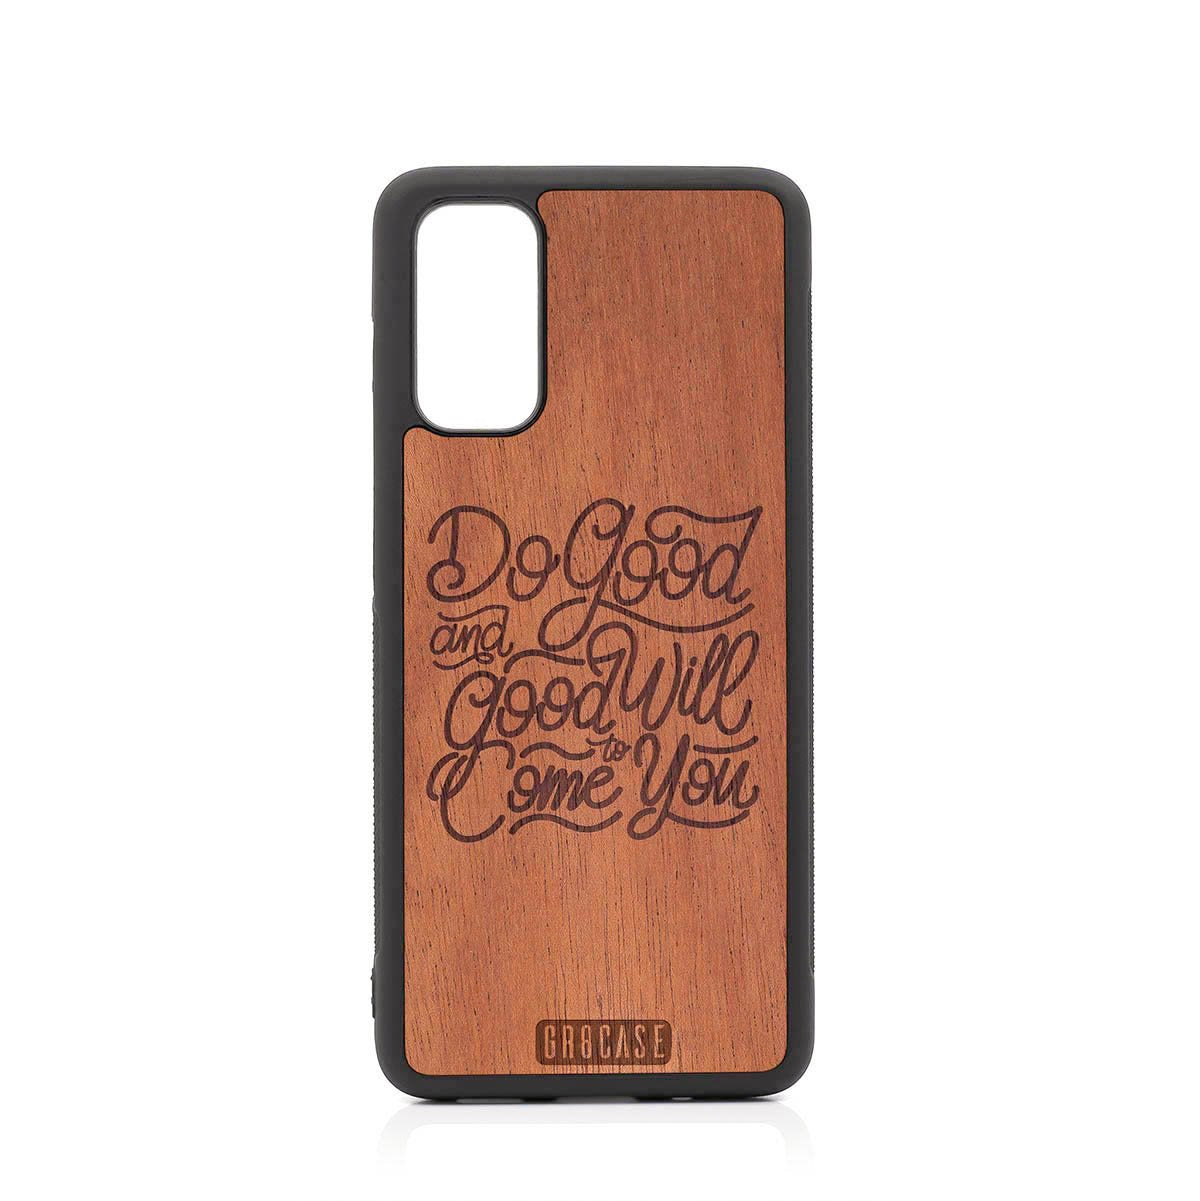 Do Good And Good Will Come To You Design Wood Case For Samsung Galaxy S20 FE 5G by GR8CASE